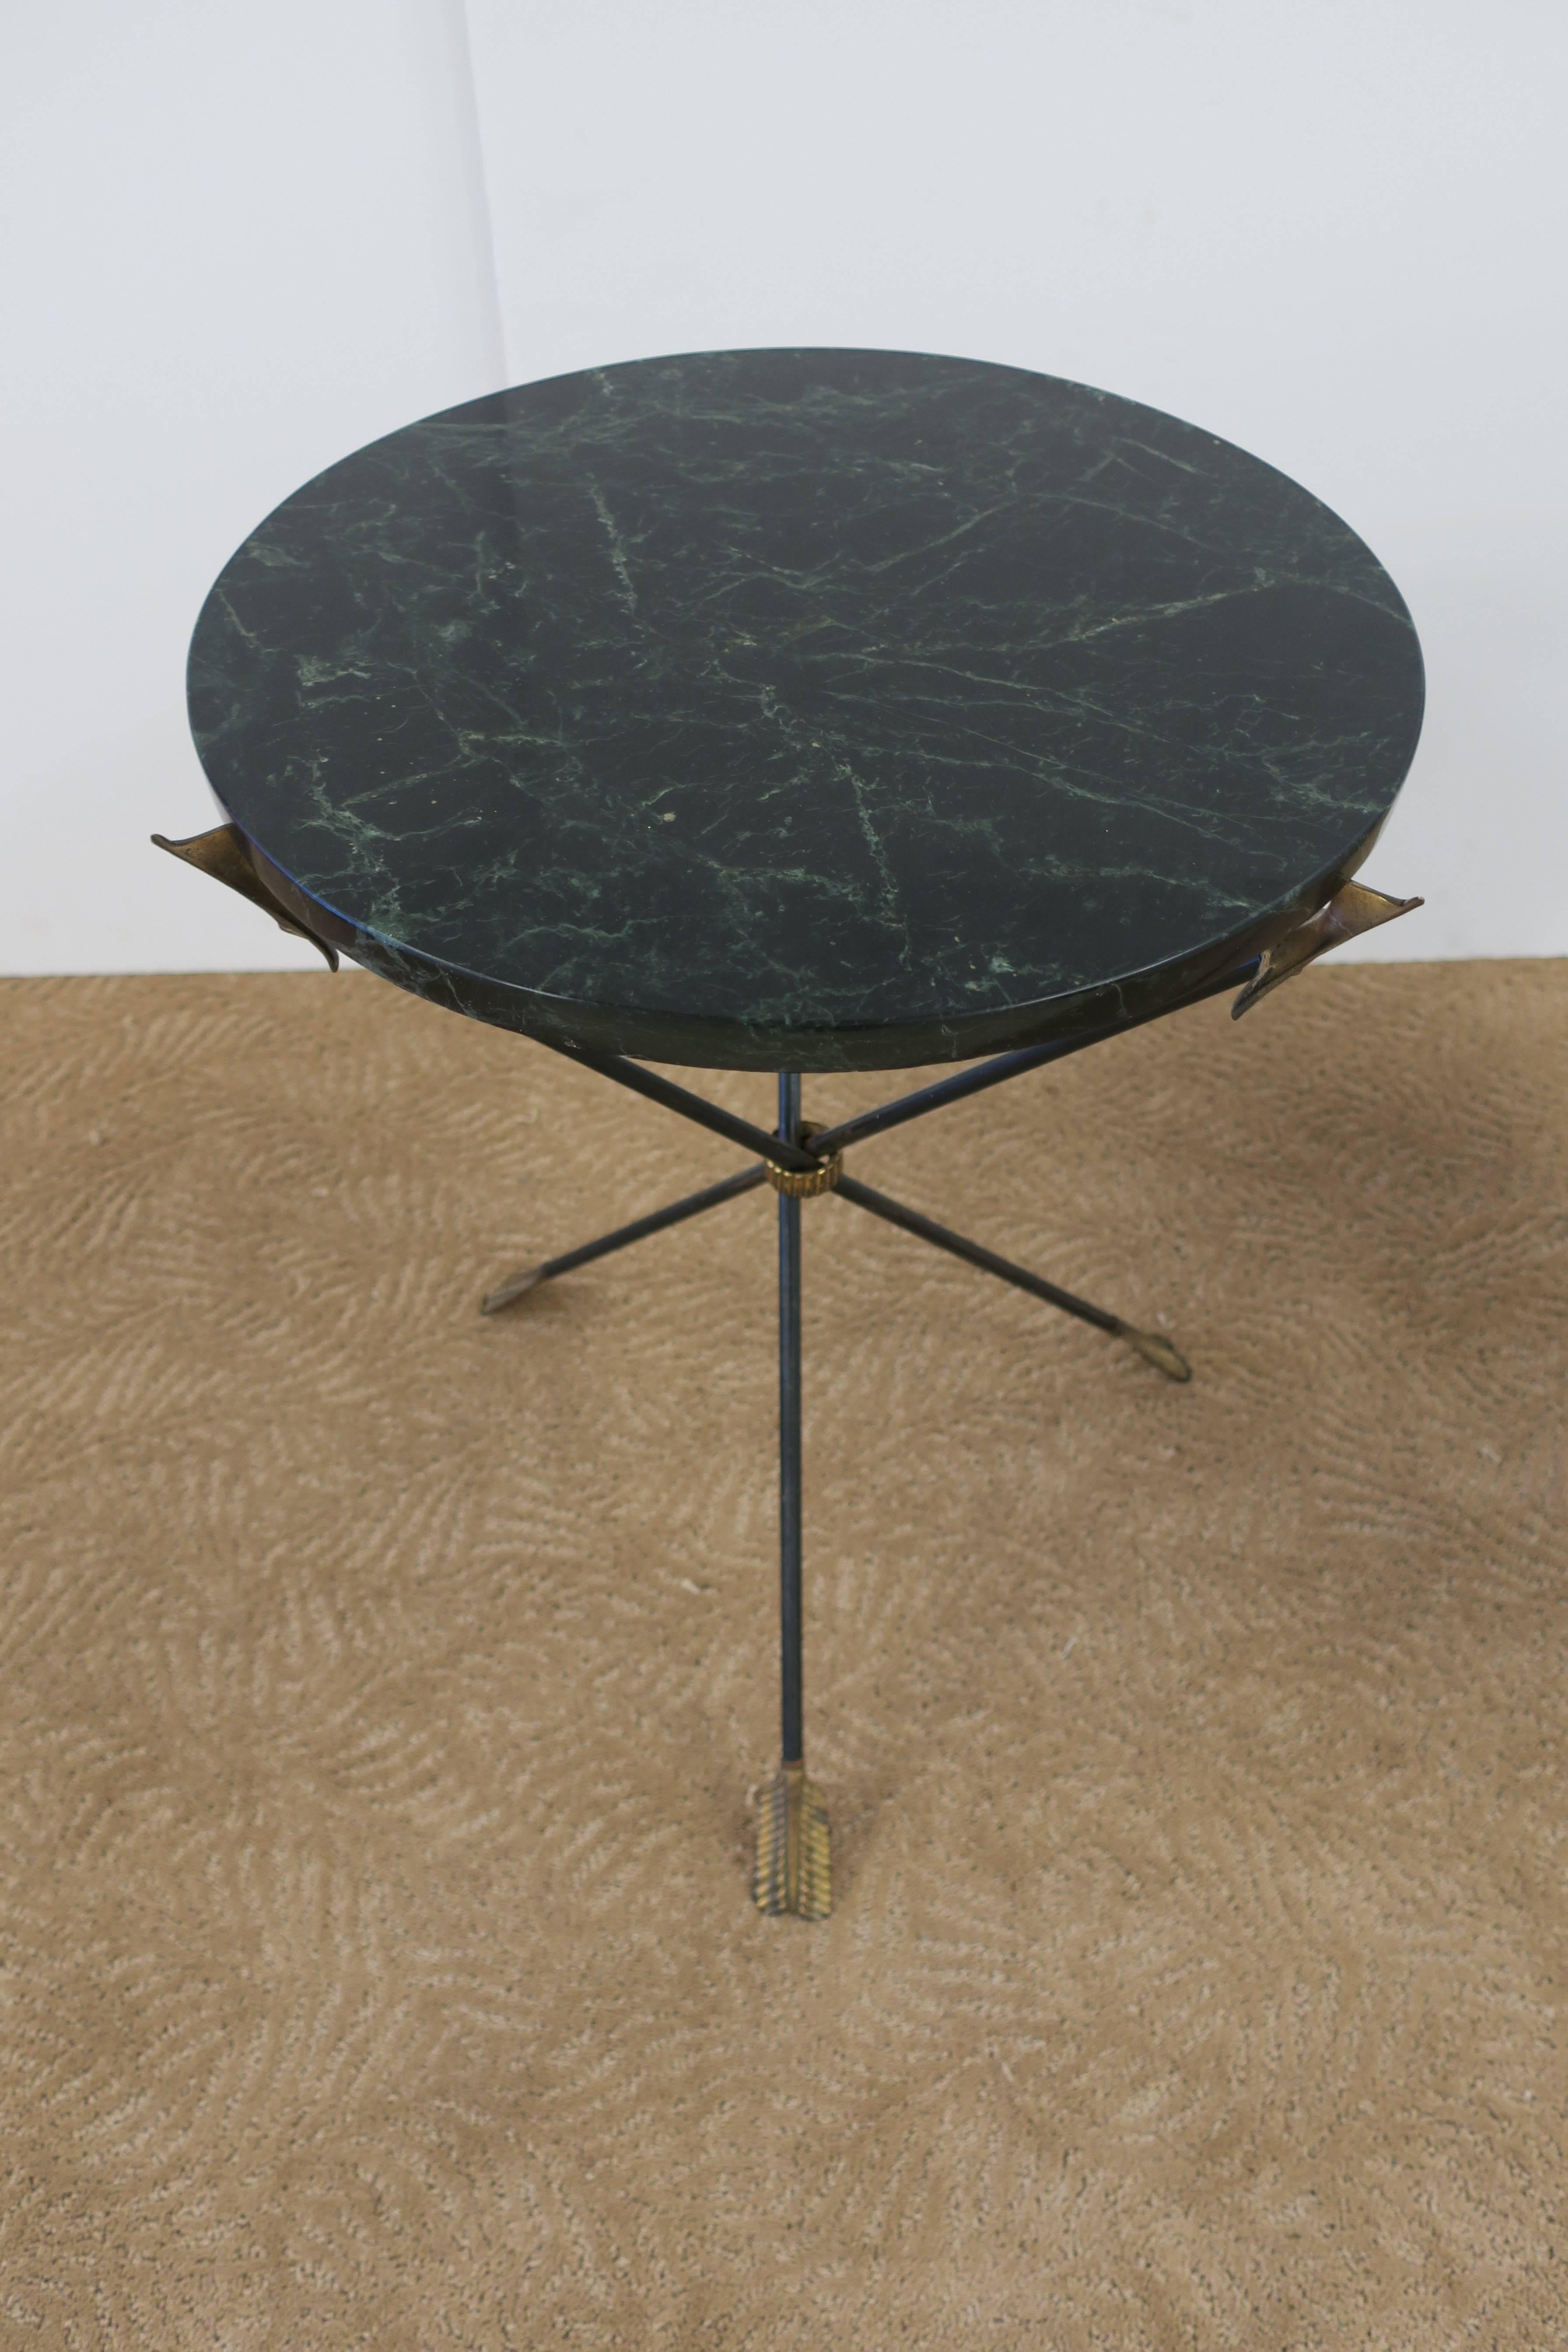 20th Century Italian Neoclassical Dark Green Marble and Brass Tripod Side Table